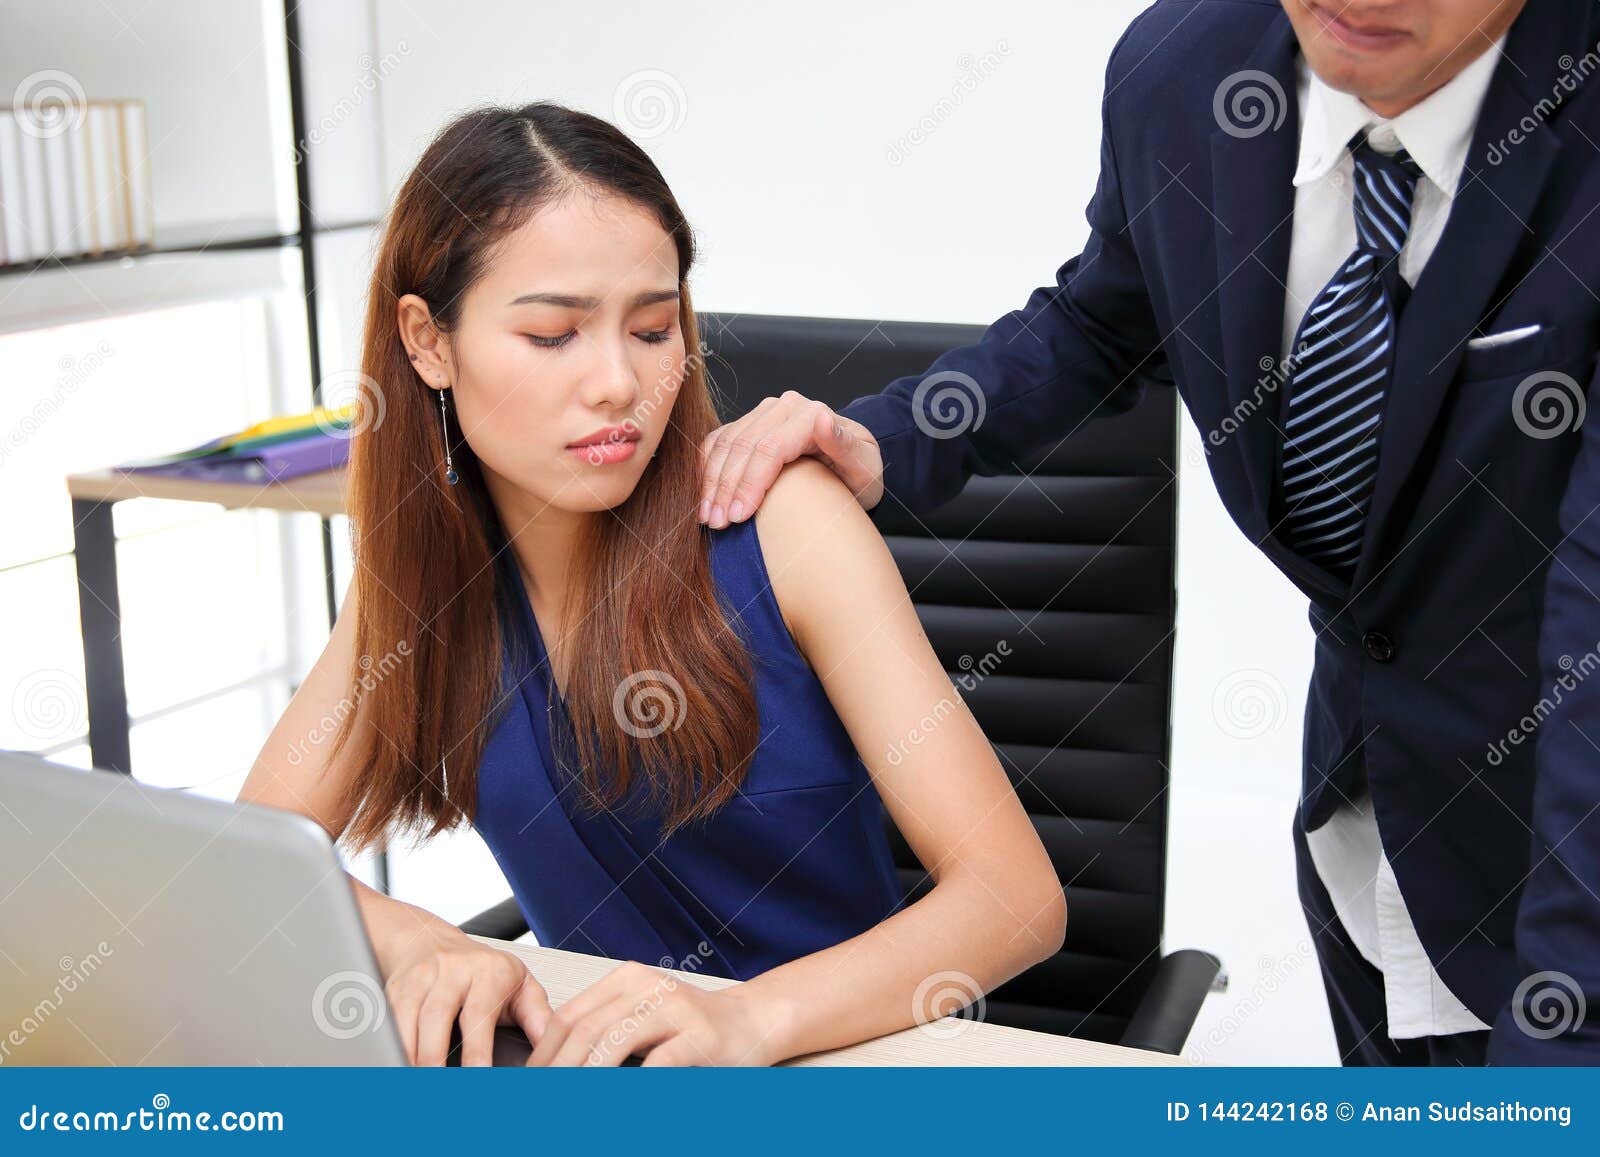 Man Boss Touching Woman Knee In Workplace Of Office Sexual Harassment In Office Royalty Free